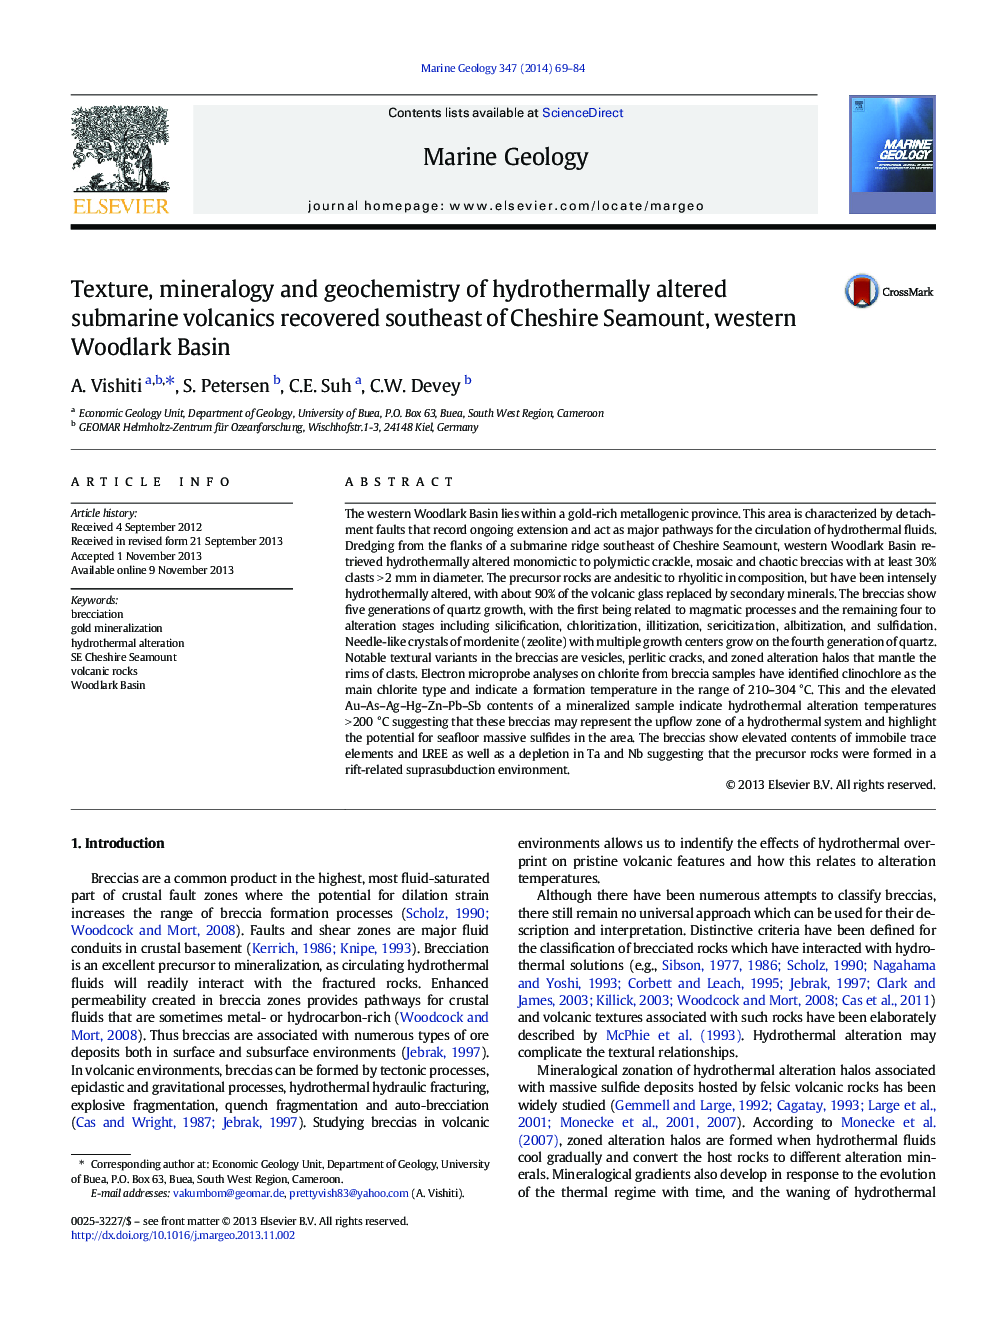 Texture, mineralogy and geochemistry of hydrothermally altered submarine volcanics recovered southeast of Cheshire Seamount, western Woodlark Basin